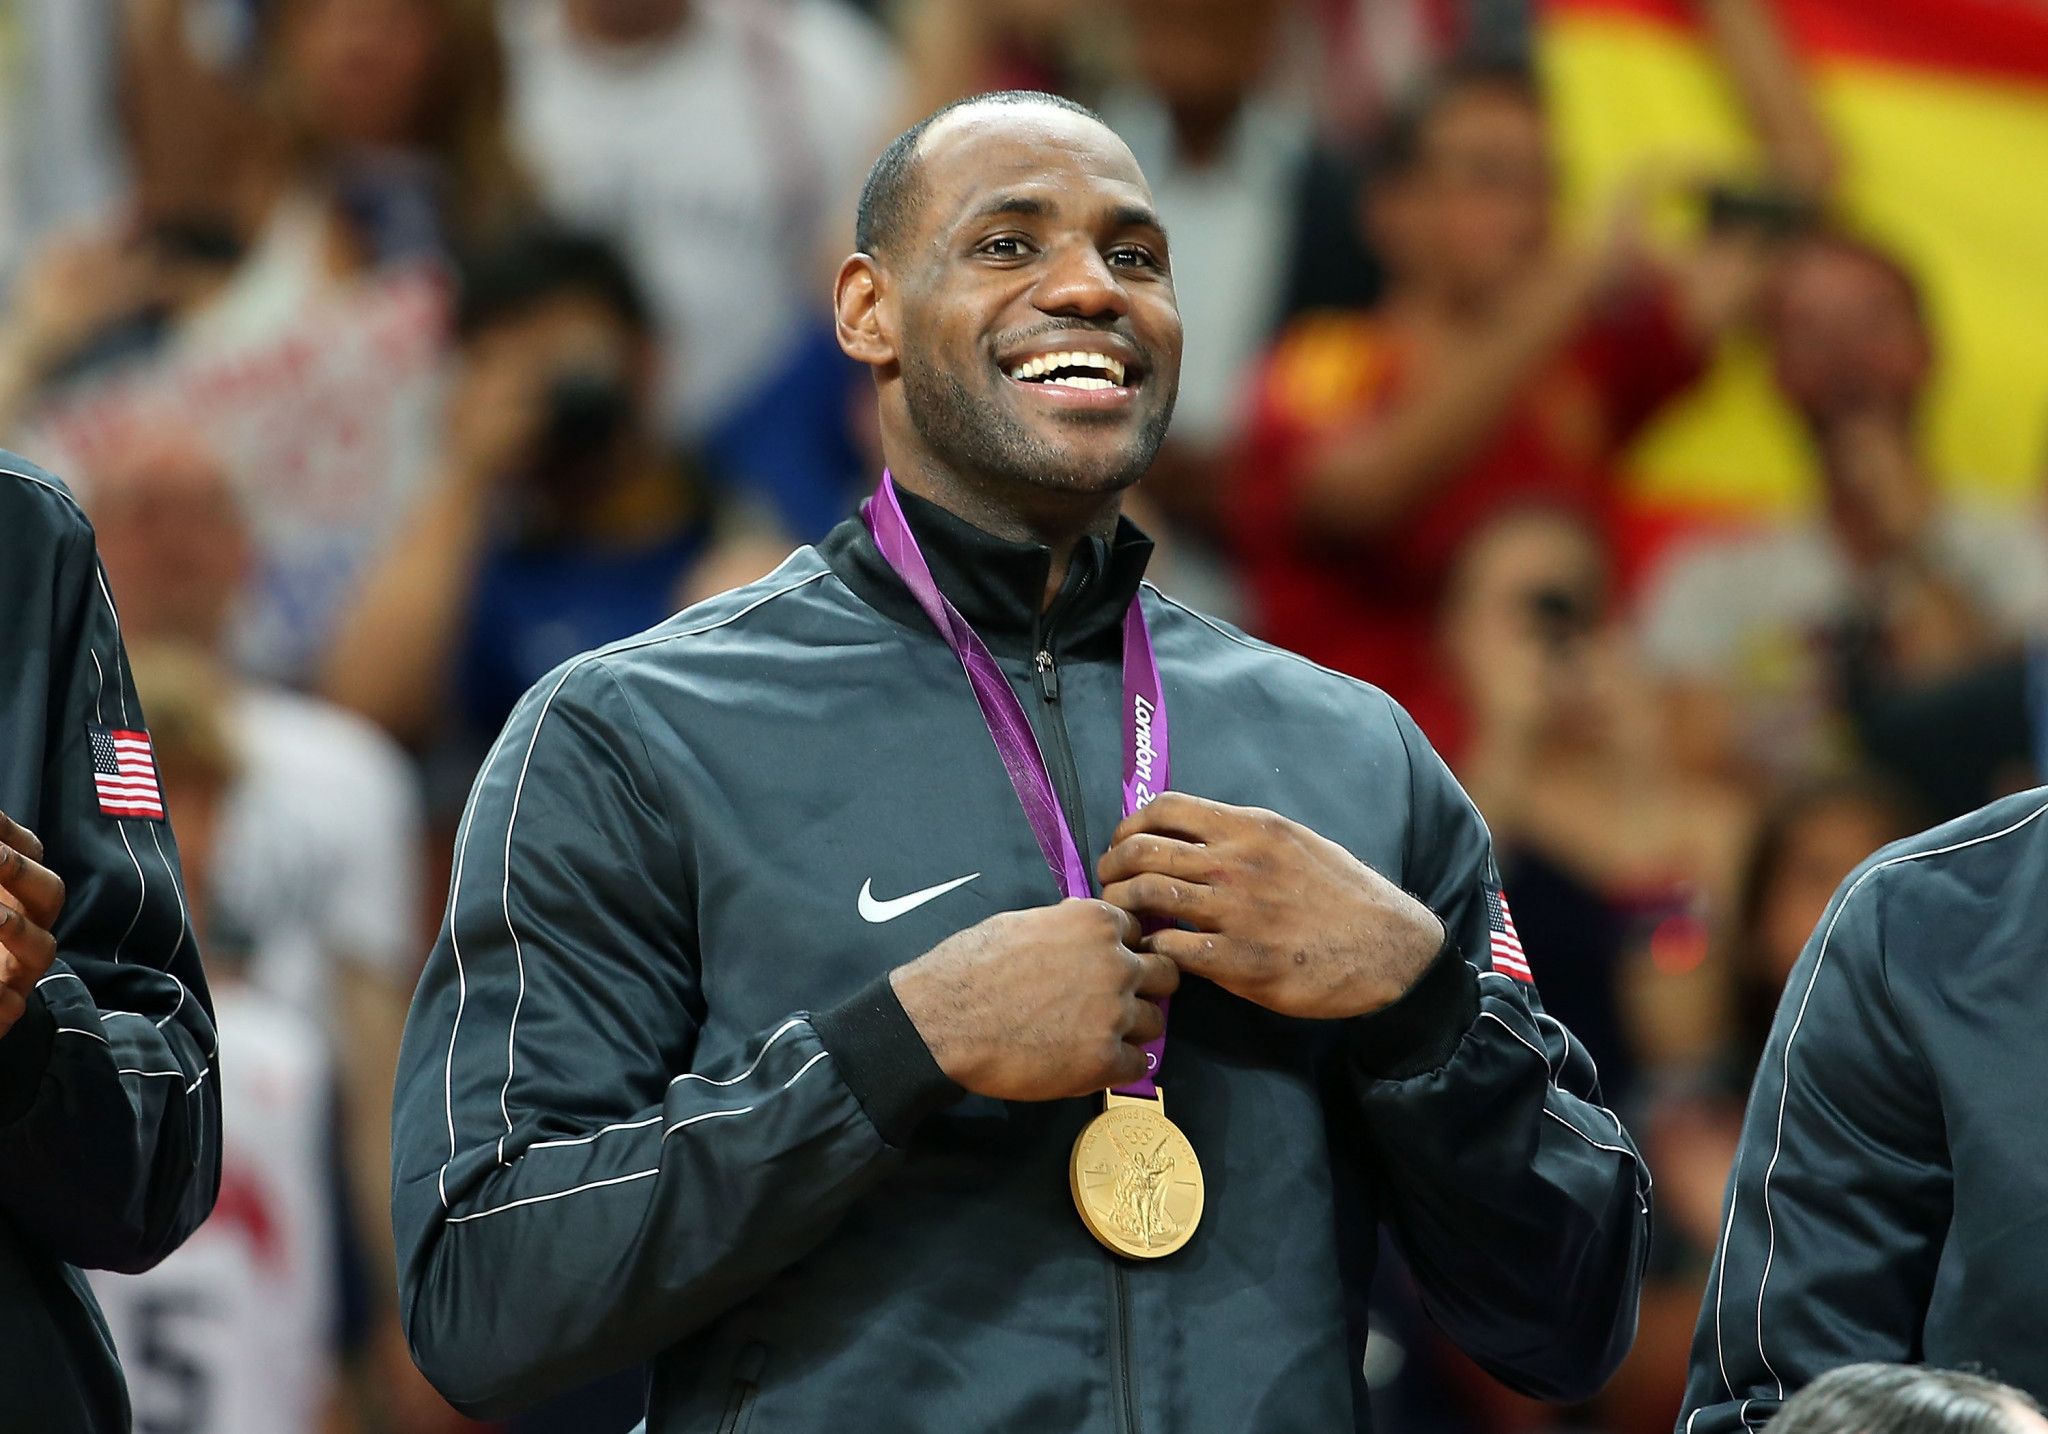 LeBron James won the gold medal in 2012 London Olympics